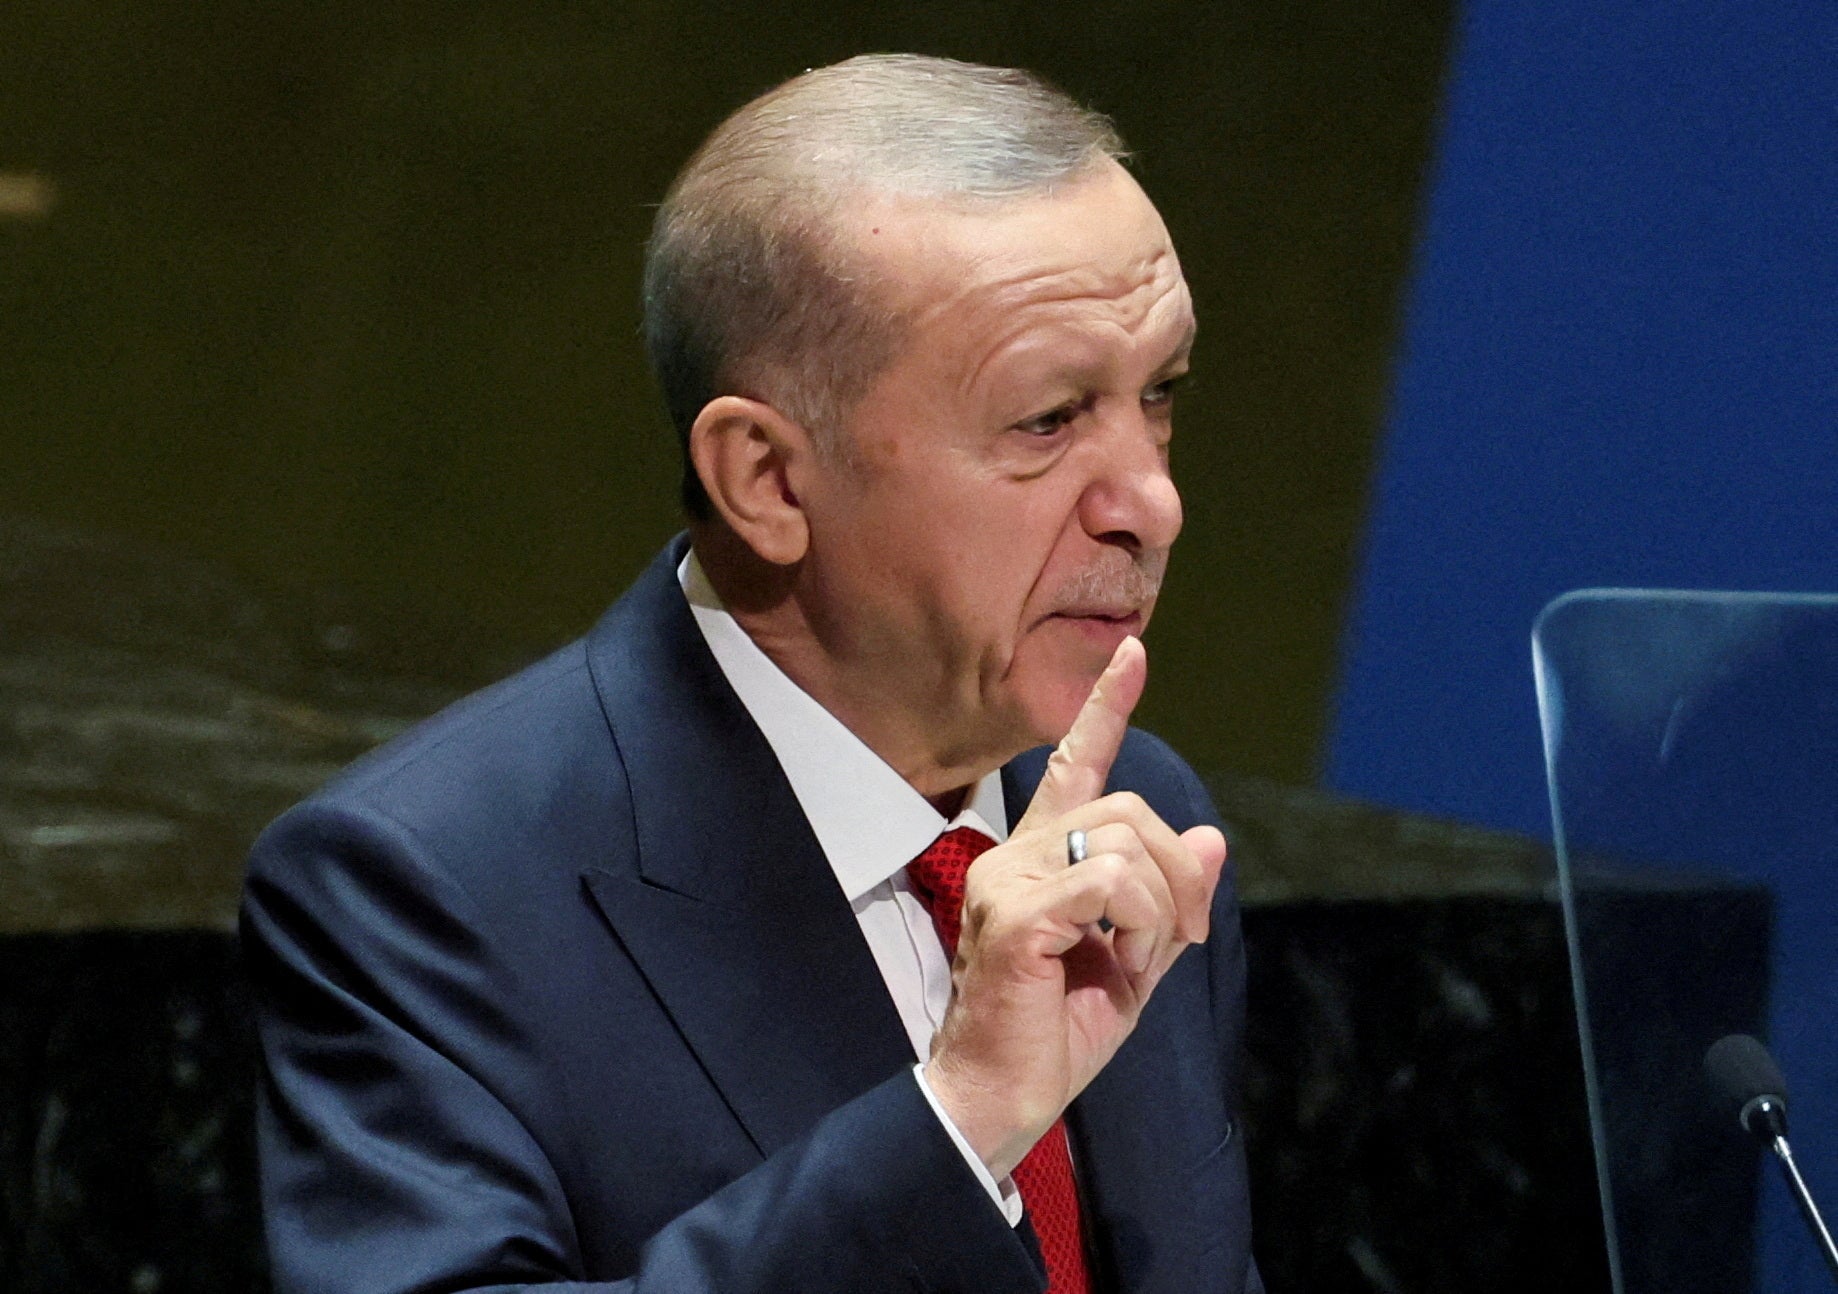 Turkey’s President Tayyip Erdogan addresses the 78th Session of the UN General Assembly in New York City in October